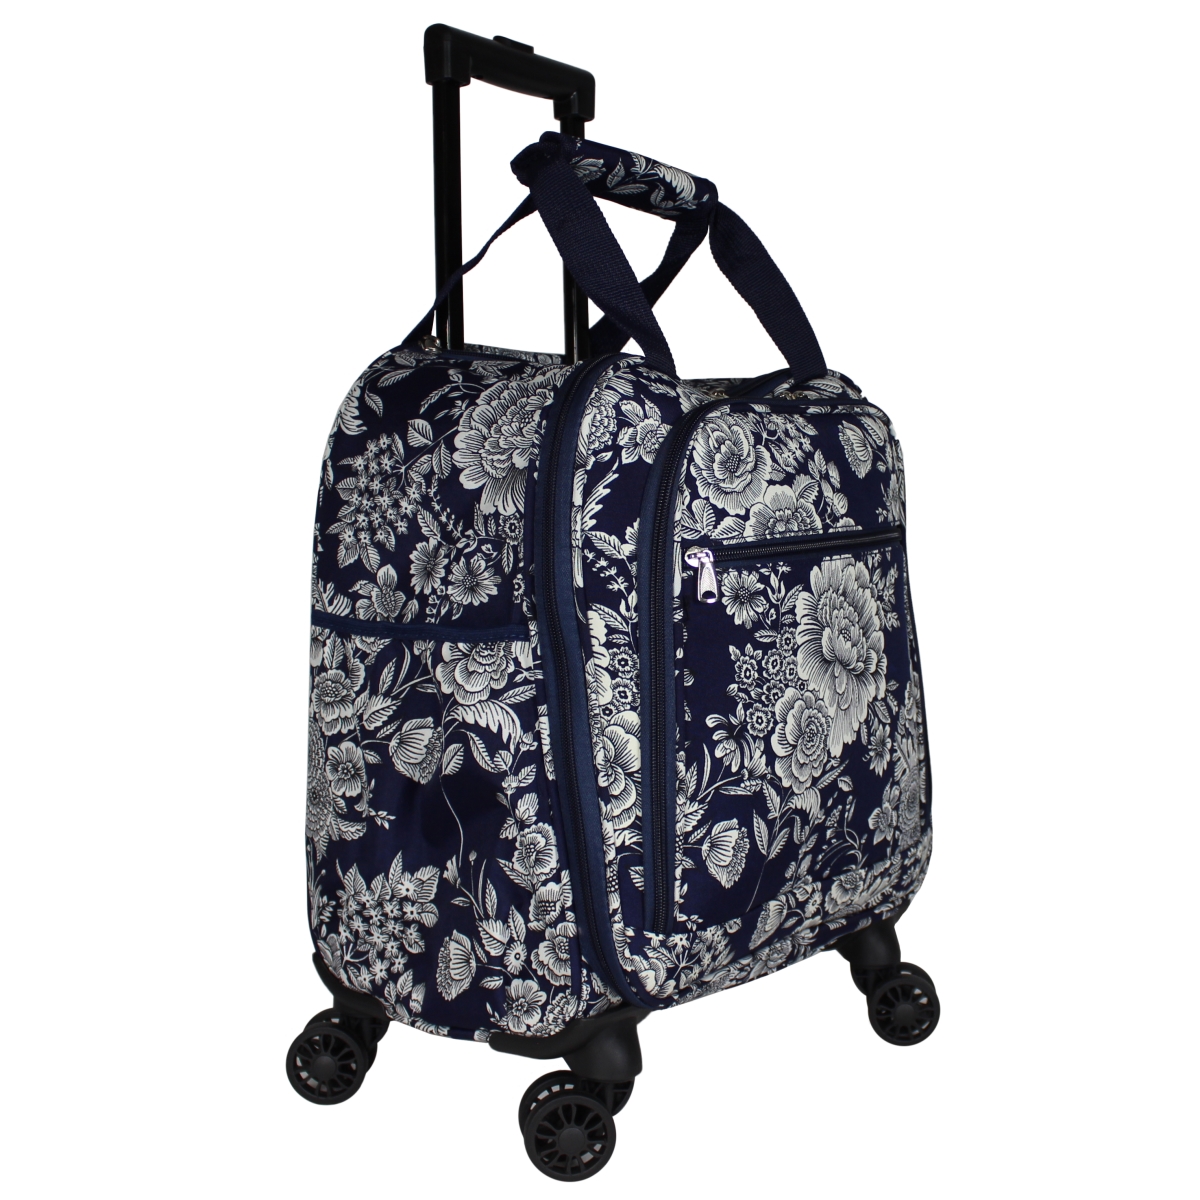 815501-212 18 In. Prints Spinner Carry-on Luggage, Navy White Flowers